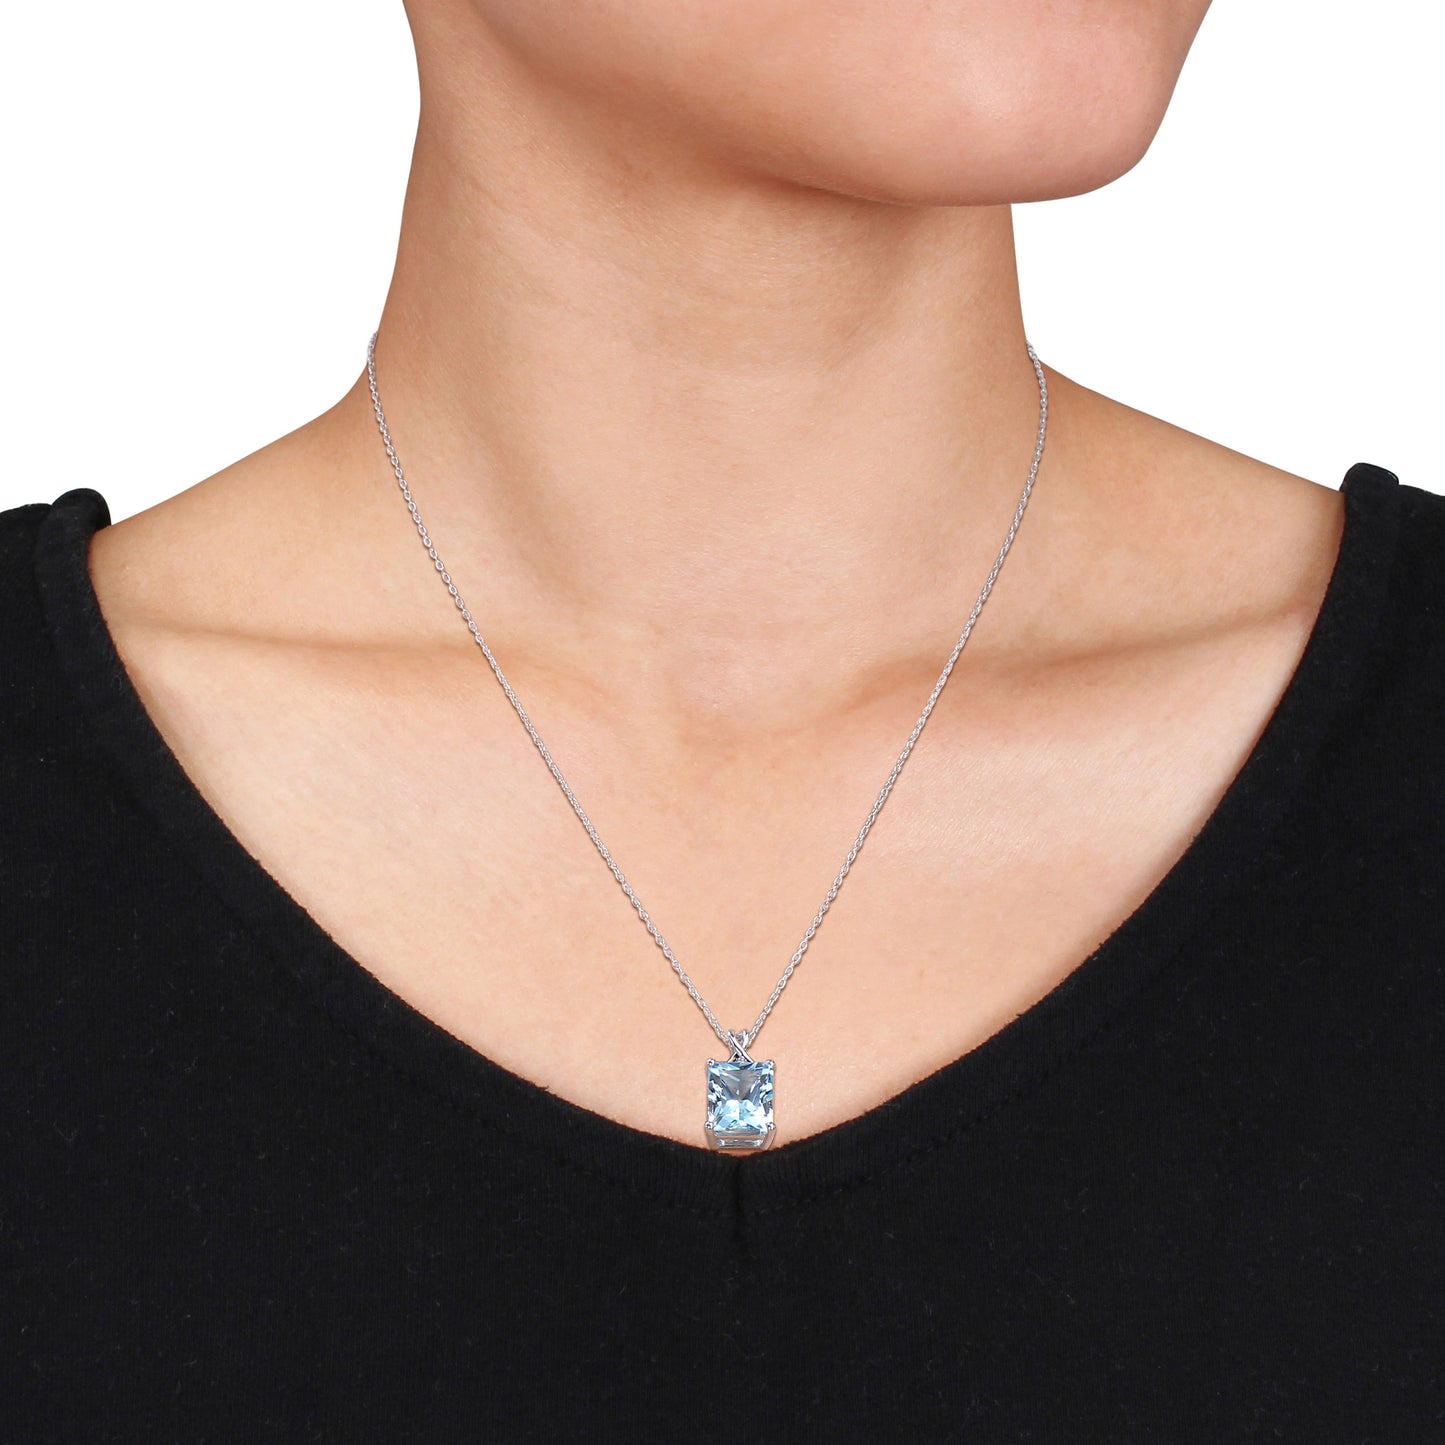 7 1/2ct Octagon Blue & White Topaz Necklace in Sterling Silver